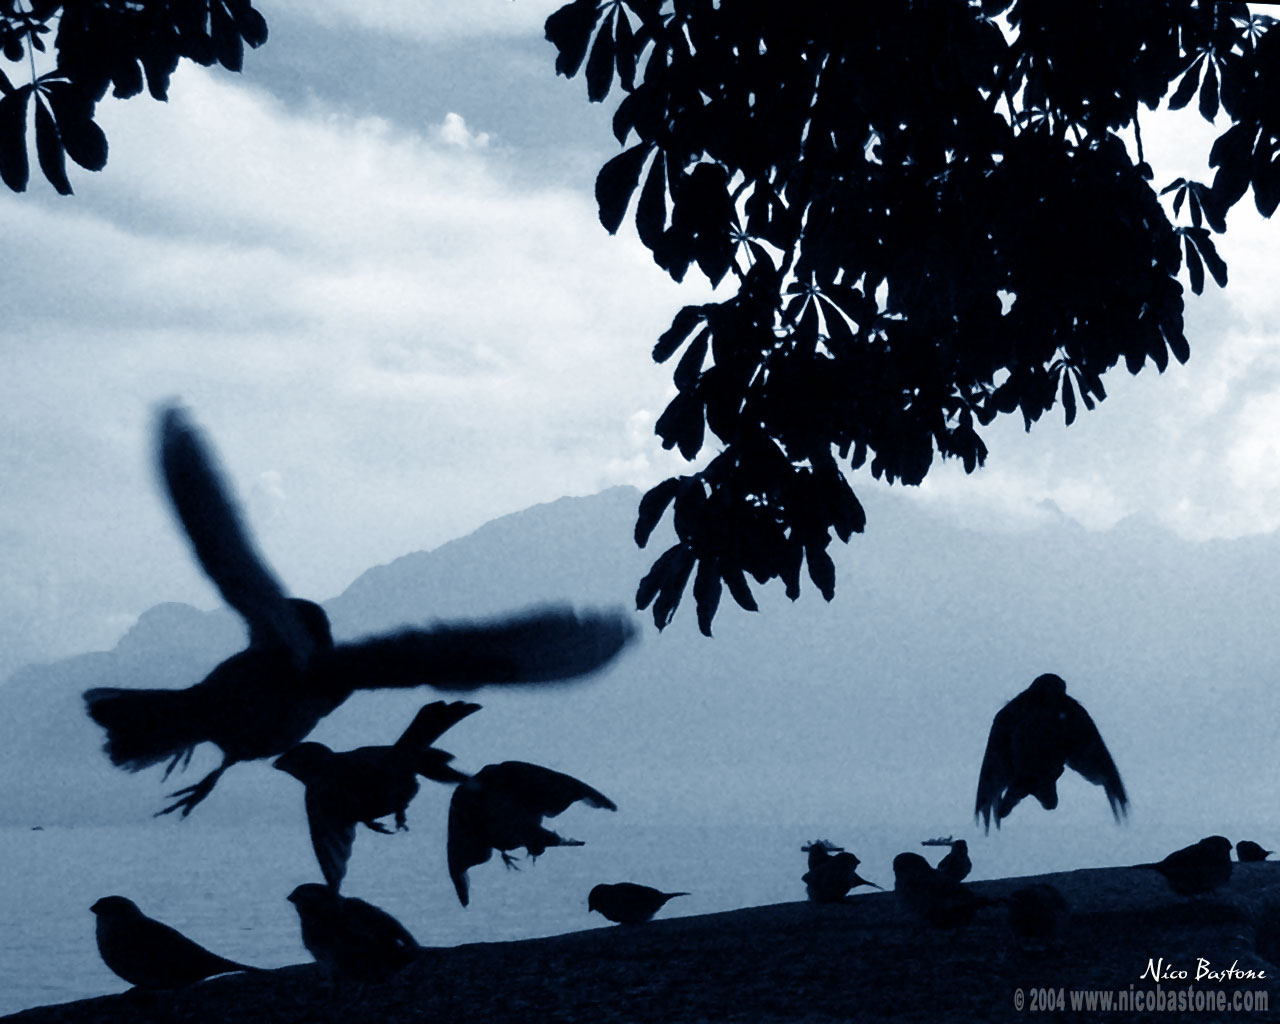 Vevey Wallpaper 1280x1024 - Copyright by Nico Bastone. All Rights Reserved